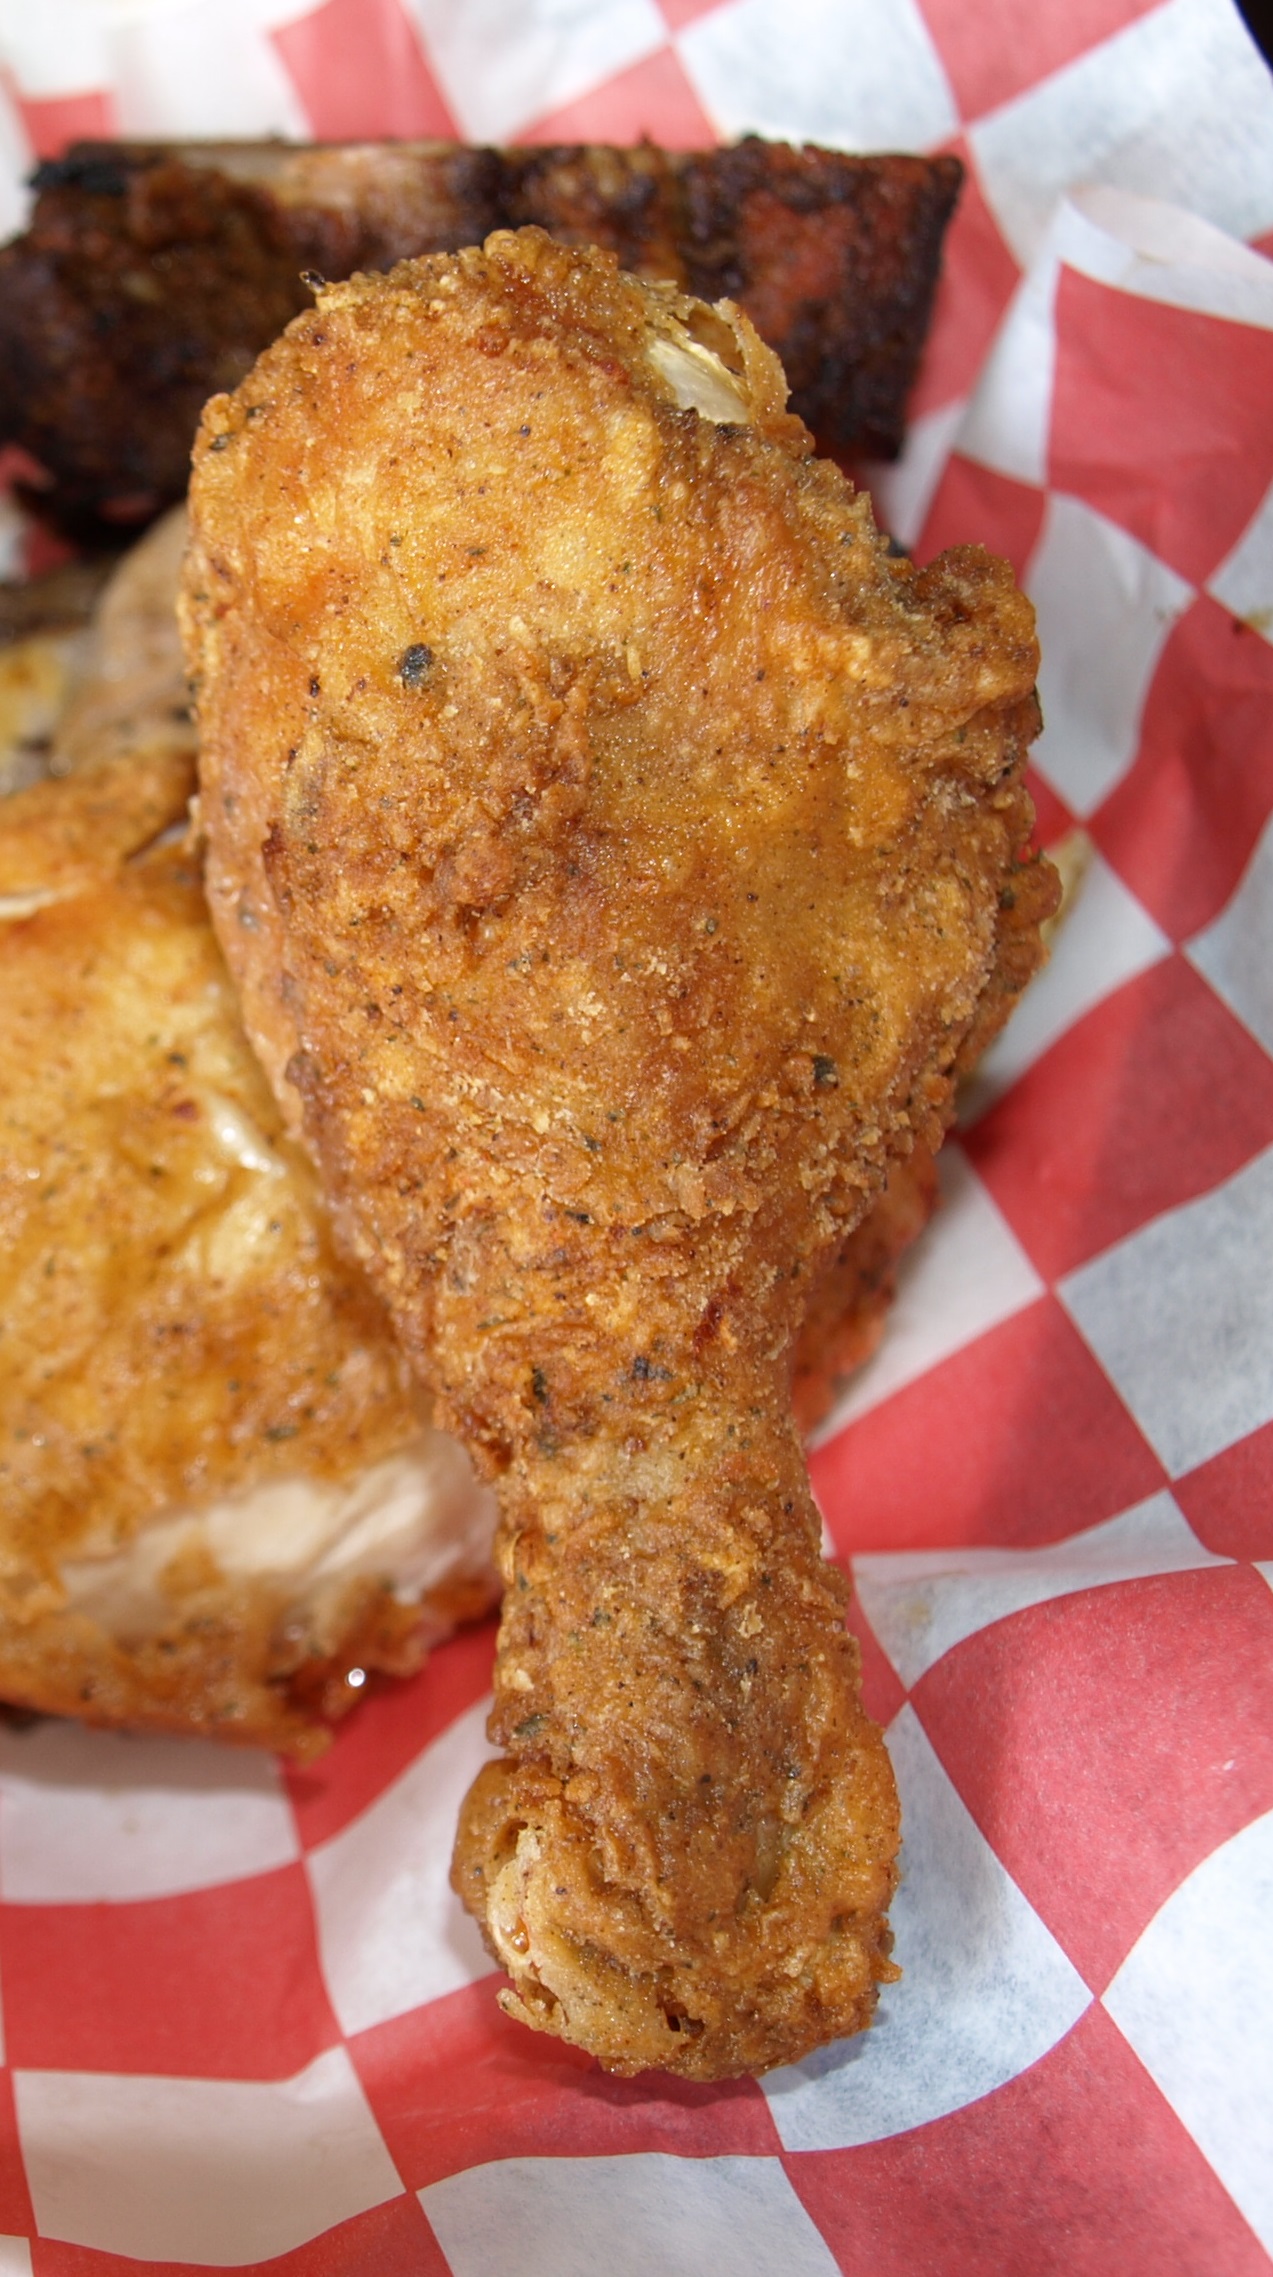   The dark meat drumstick ($7.95 for a 2-piece meal) is tender, and the spices leave a lingering kick for the taste buds .  Long Islander New photos/Connor Beach  